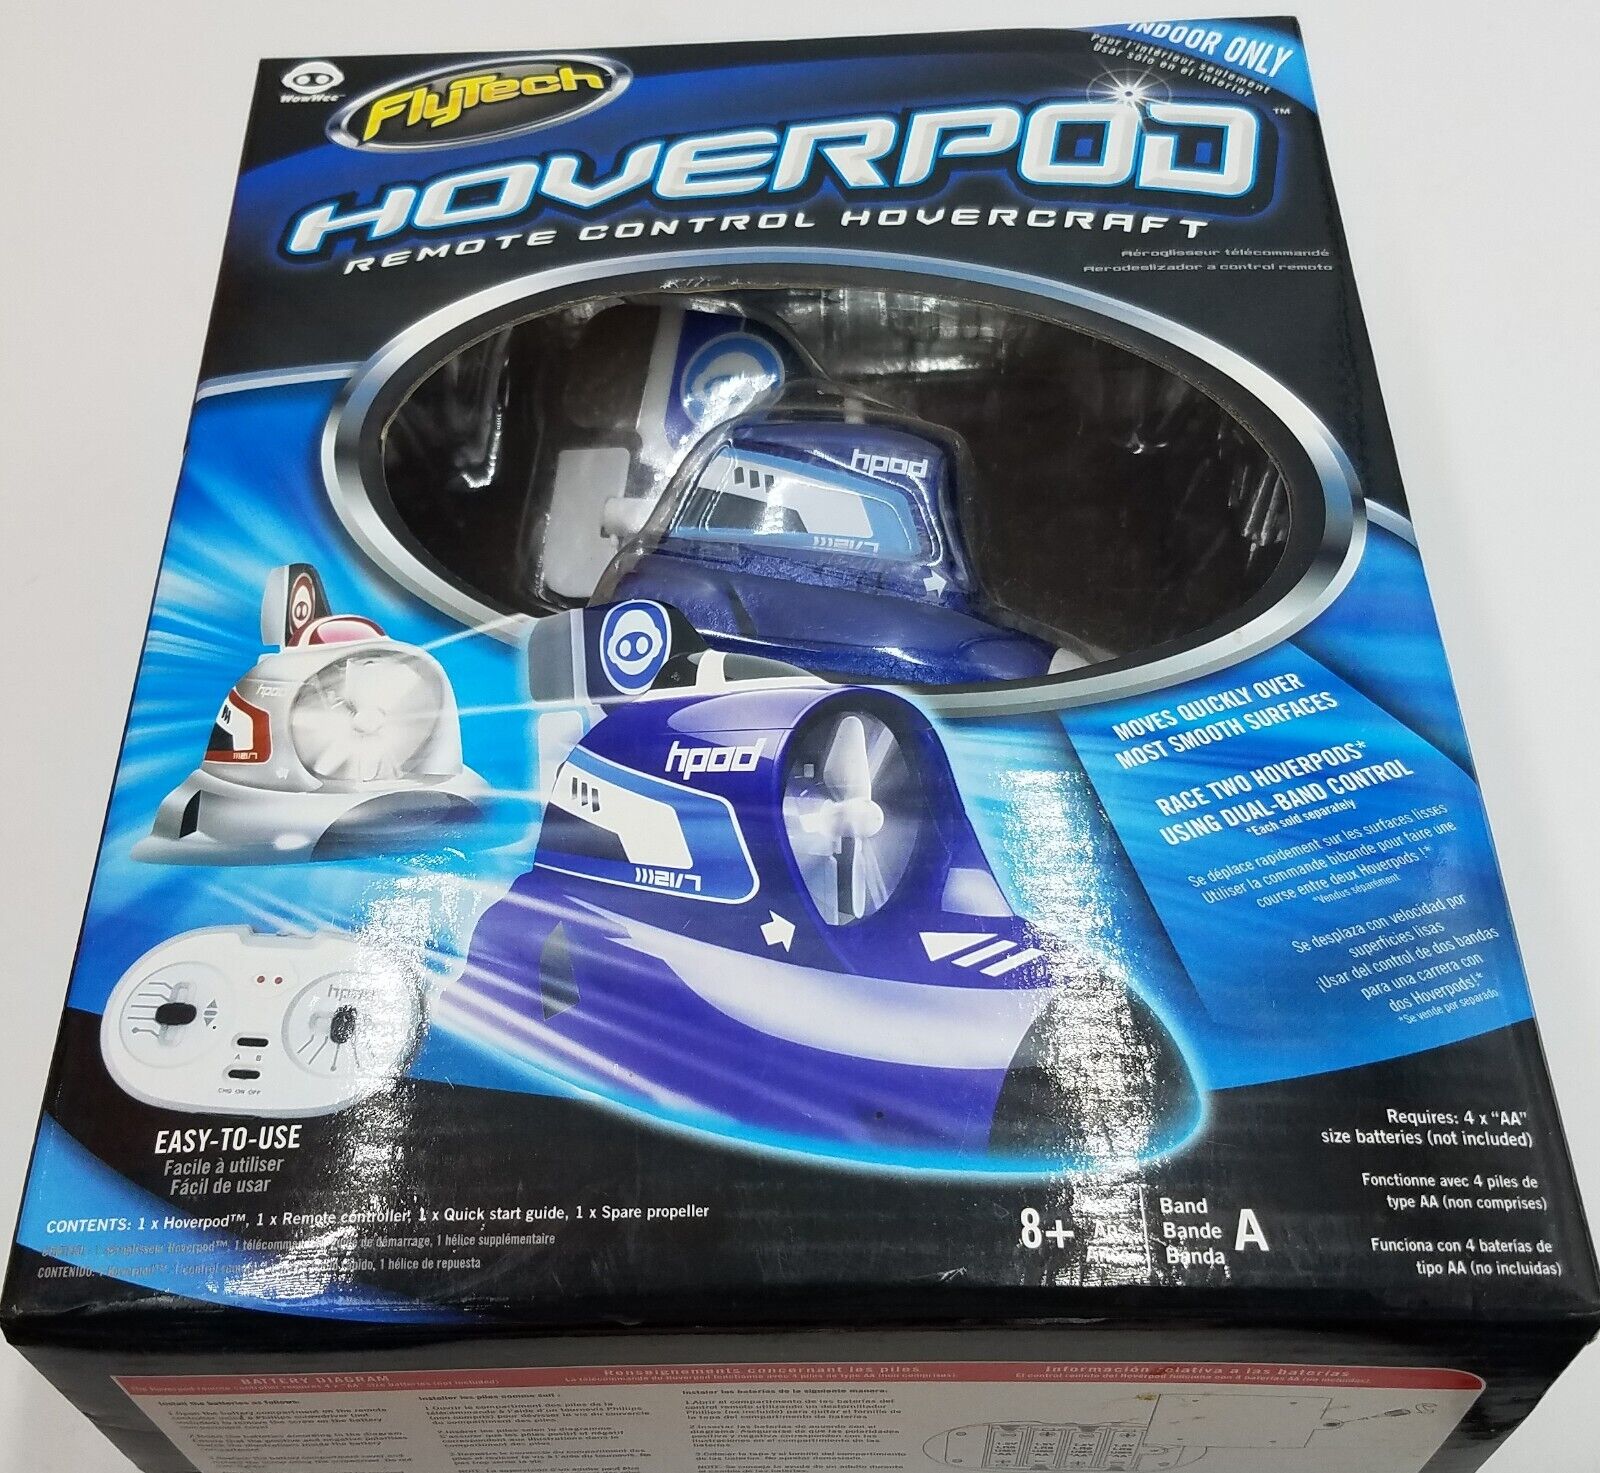 NEW Flytech Hoverpod Remote Control Hovercraft in Box w/ Contoller Indoor Use